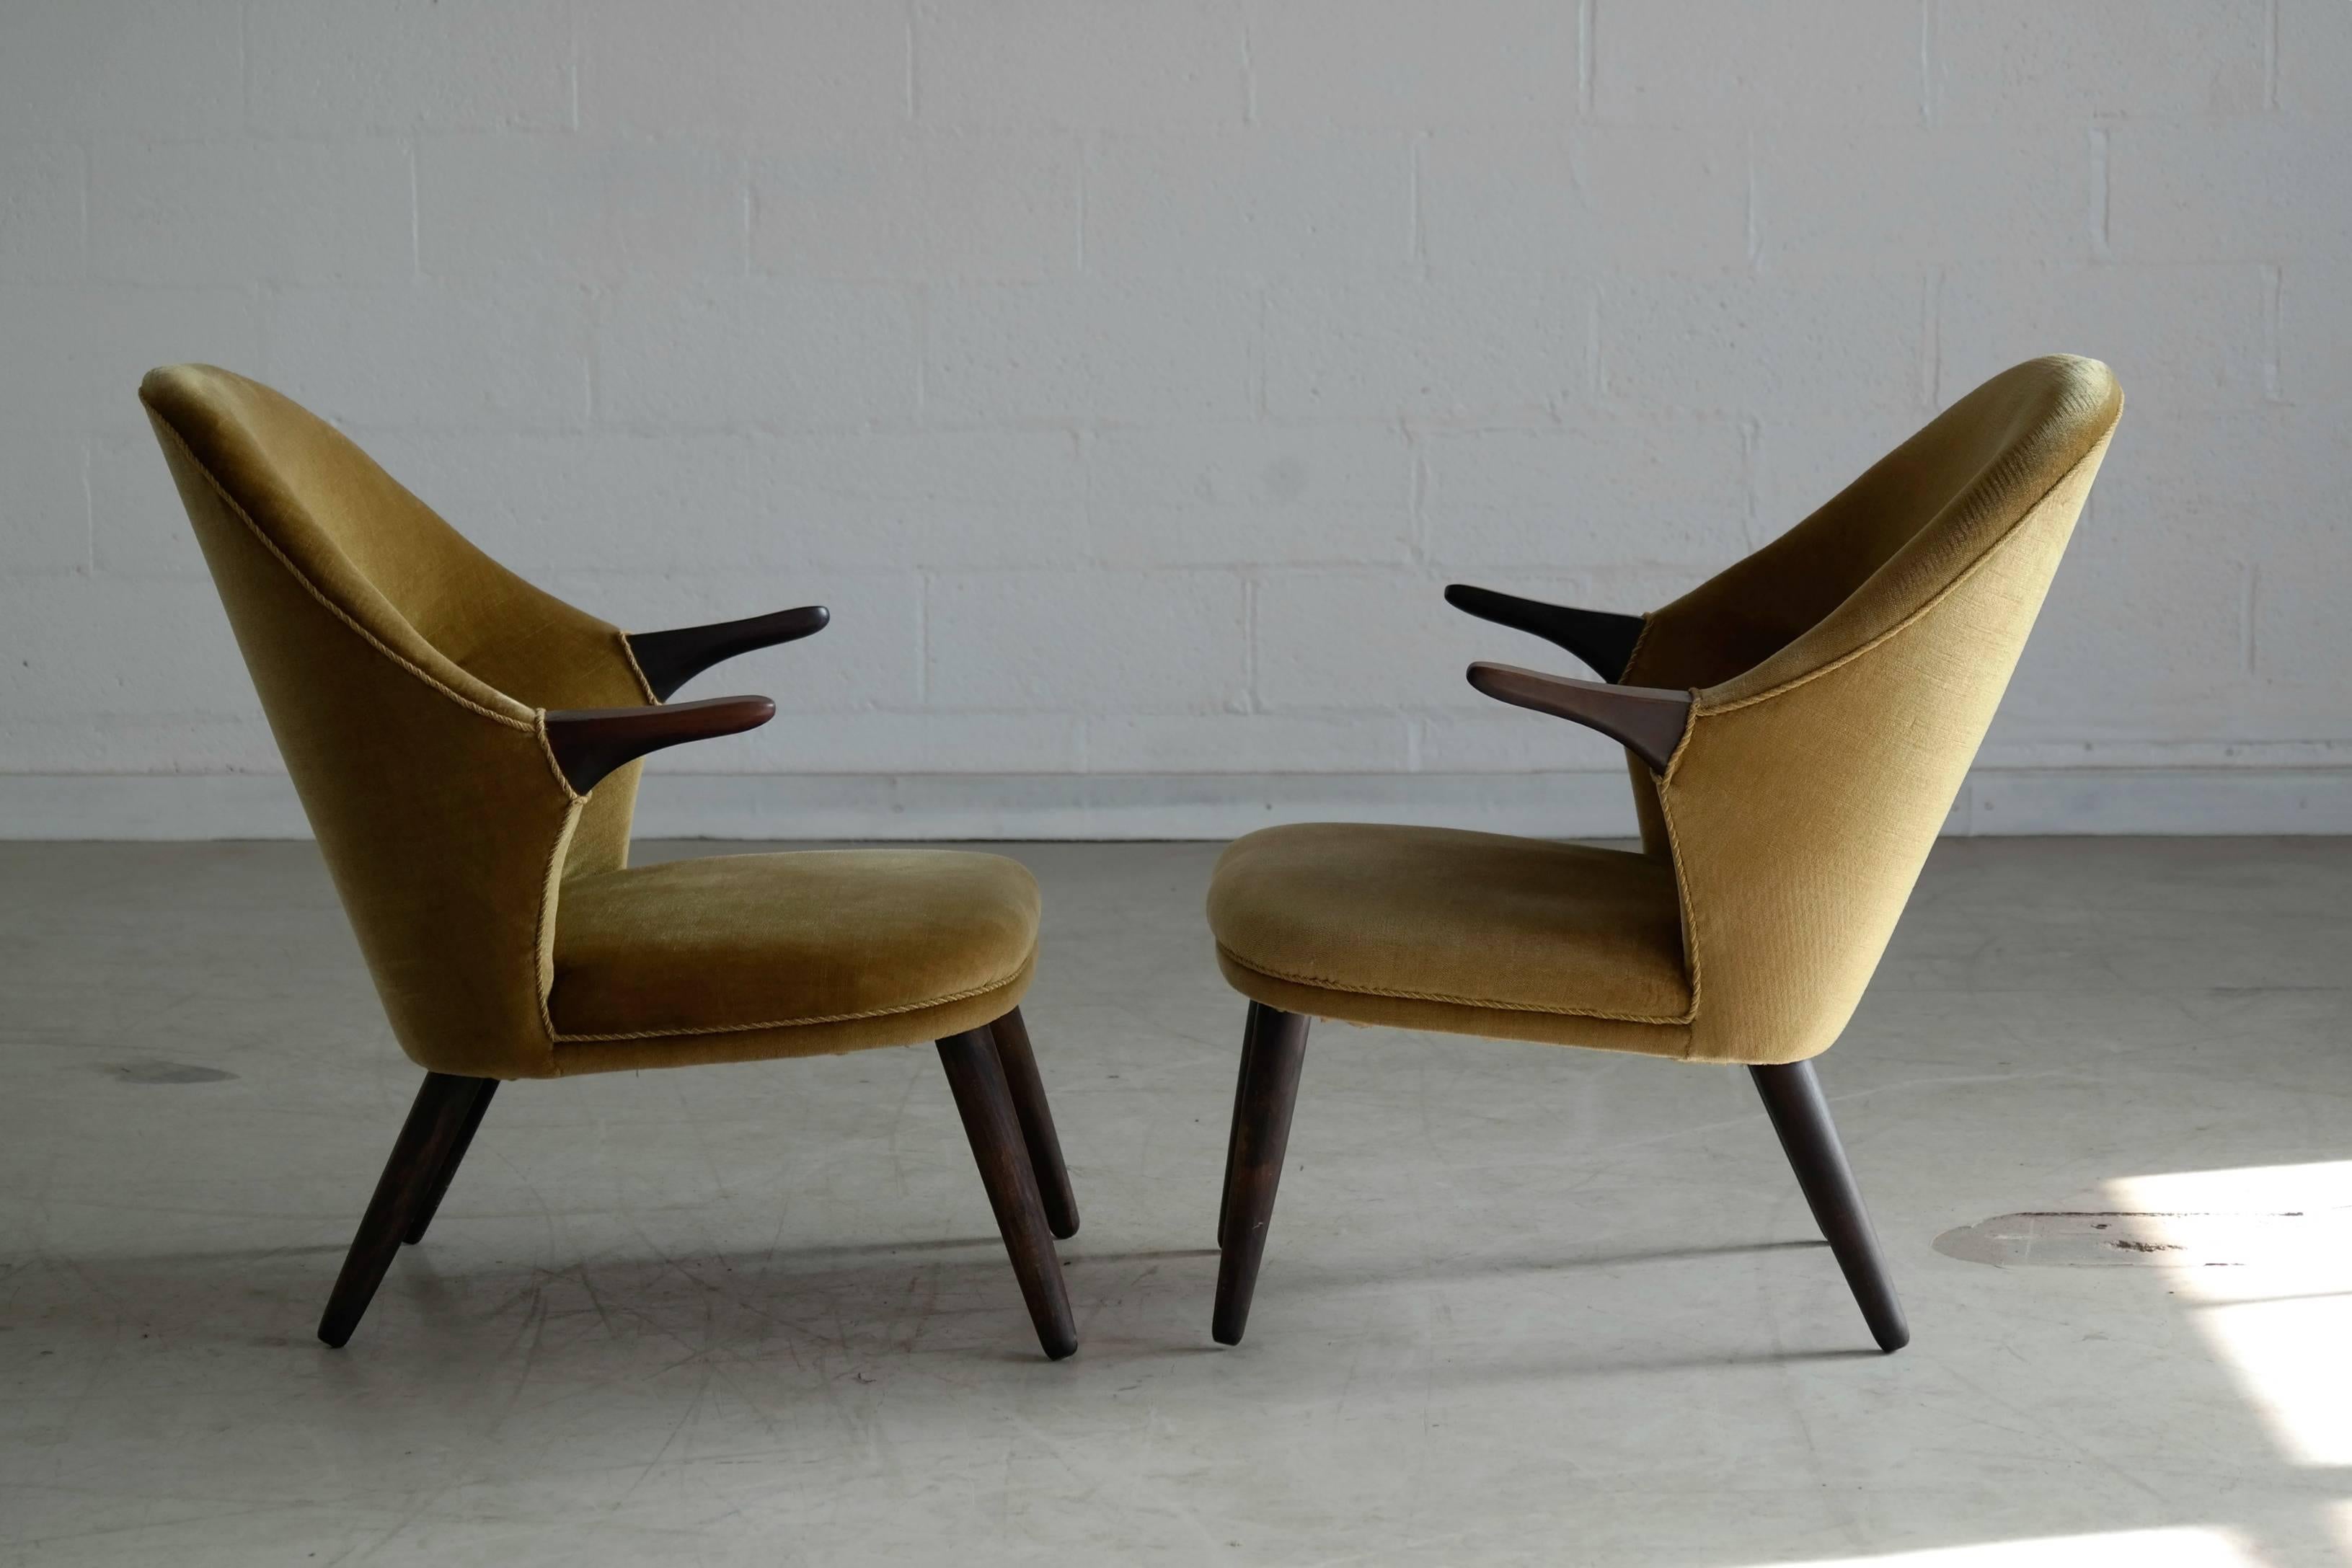 Very rare pair of 1950s easy chair in Hans Wegner's 'Mama Bear" style made by Danish manufacturer Colviggard. Covered in a golden mohair velvet in very good original condition. These chairs are beautifully and aesthetically pleasing and  add